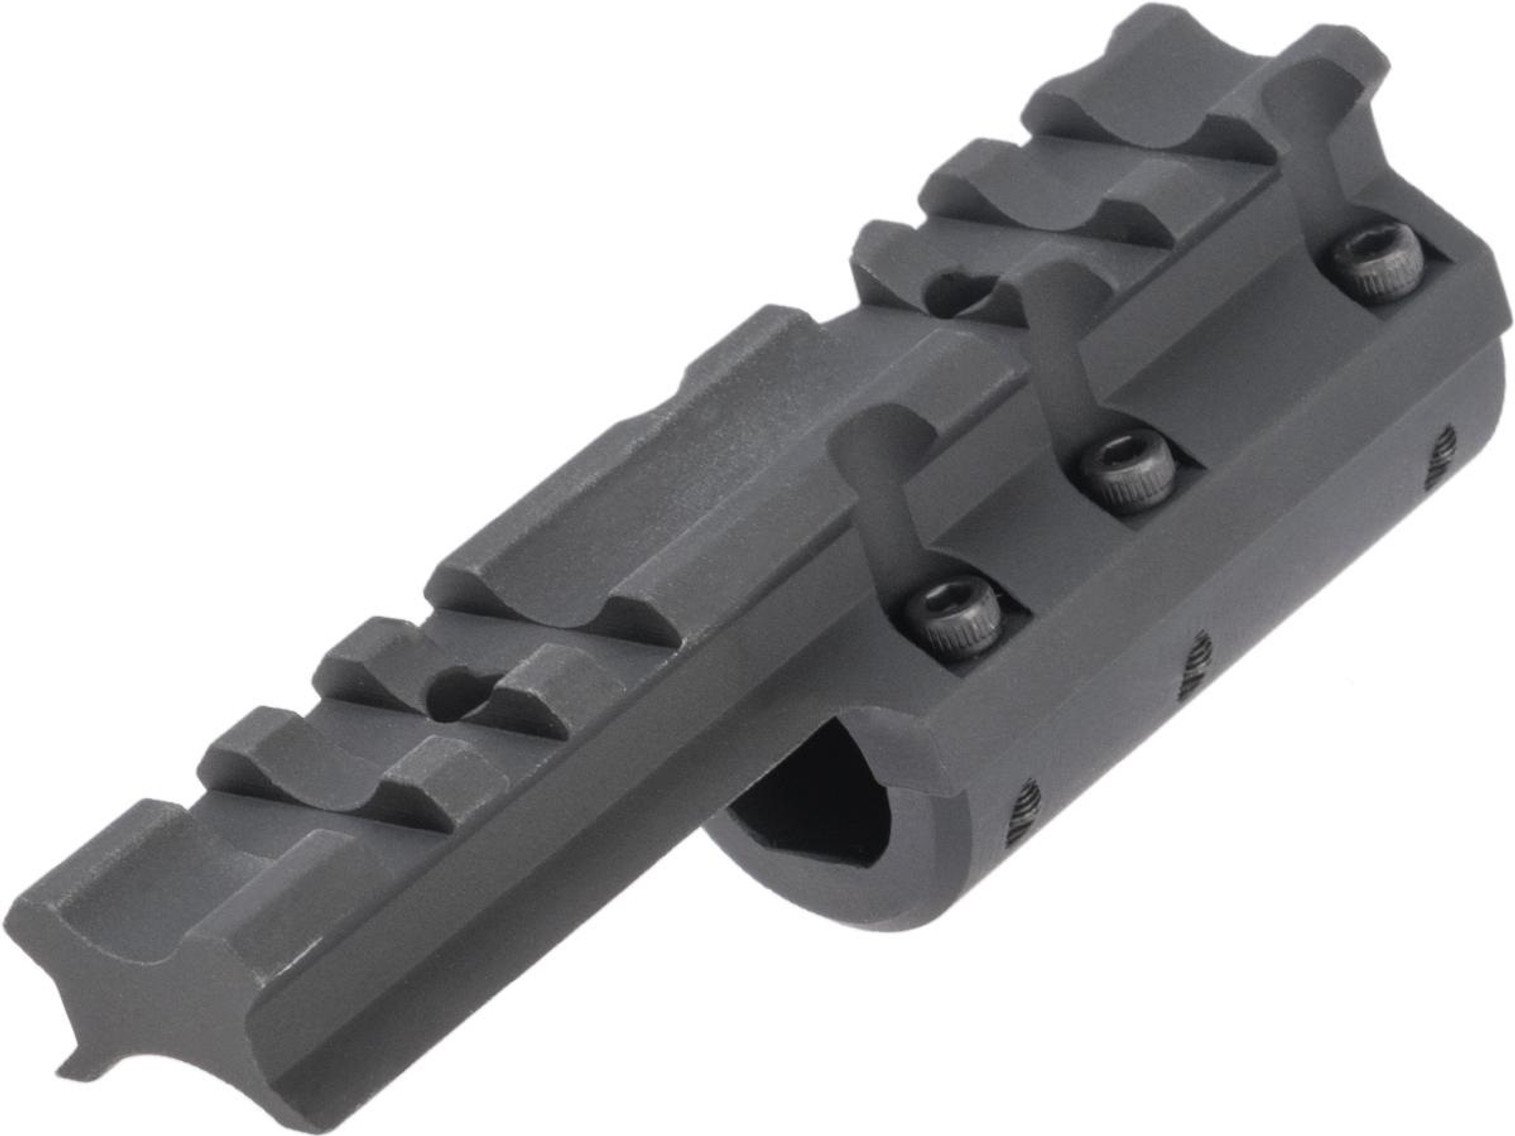 G&P Scout Type Barrel Cover and Scope Mount Base for M14 Airsoft AEG Rifles (Color: Sand)
